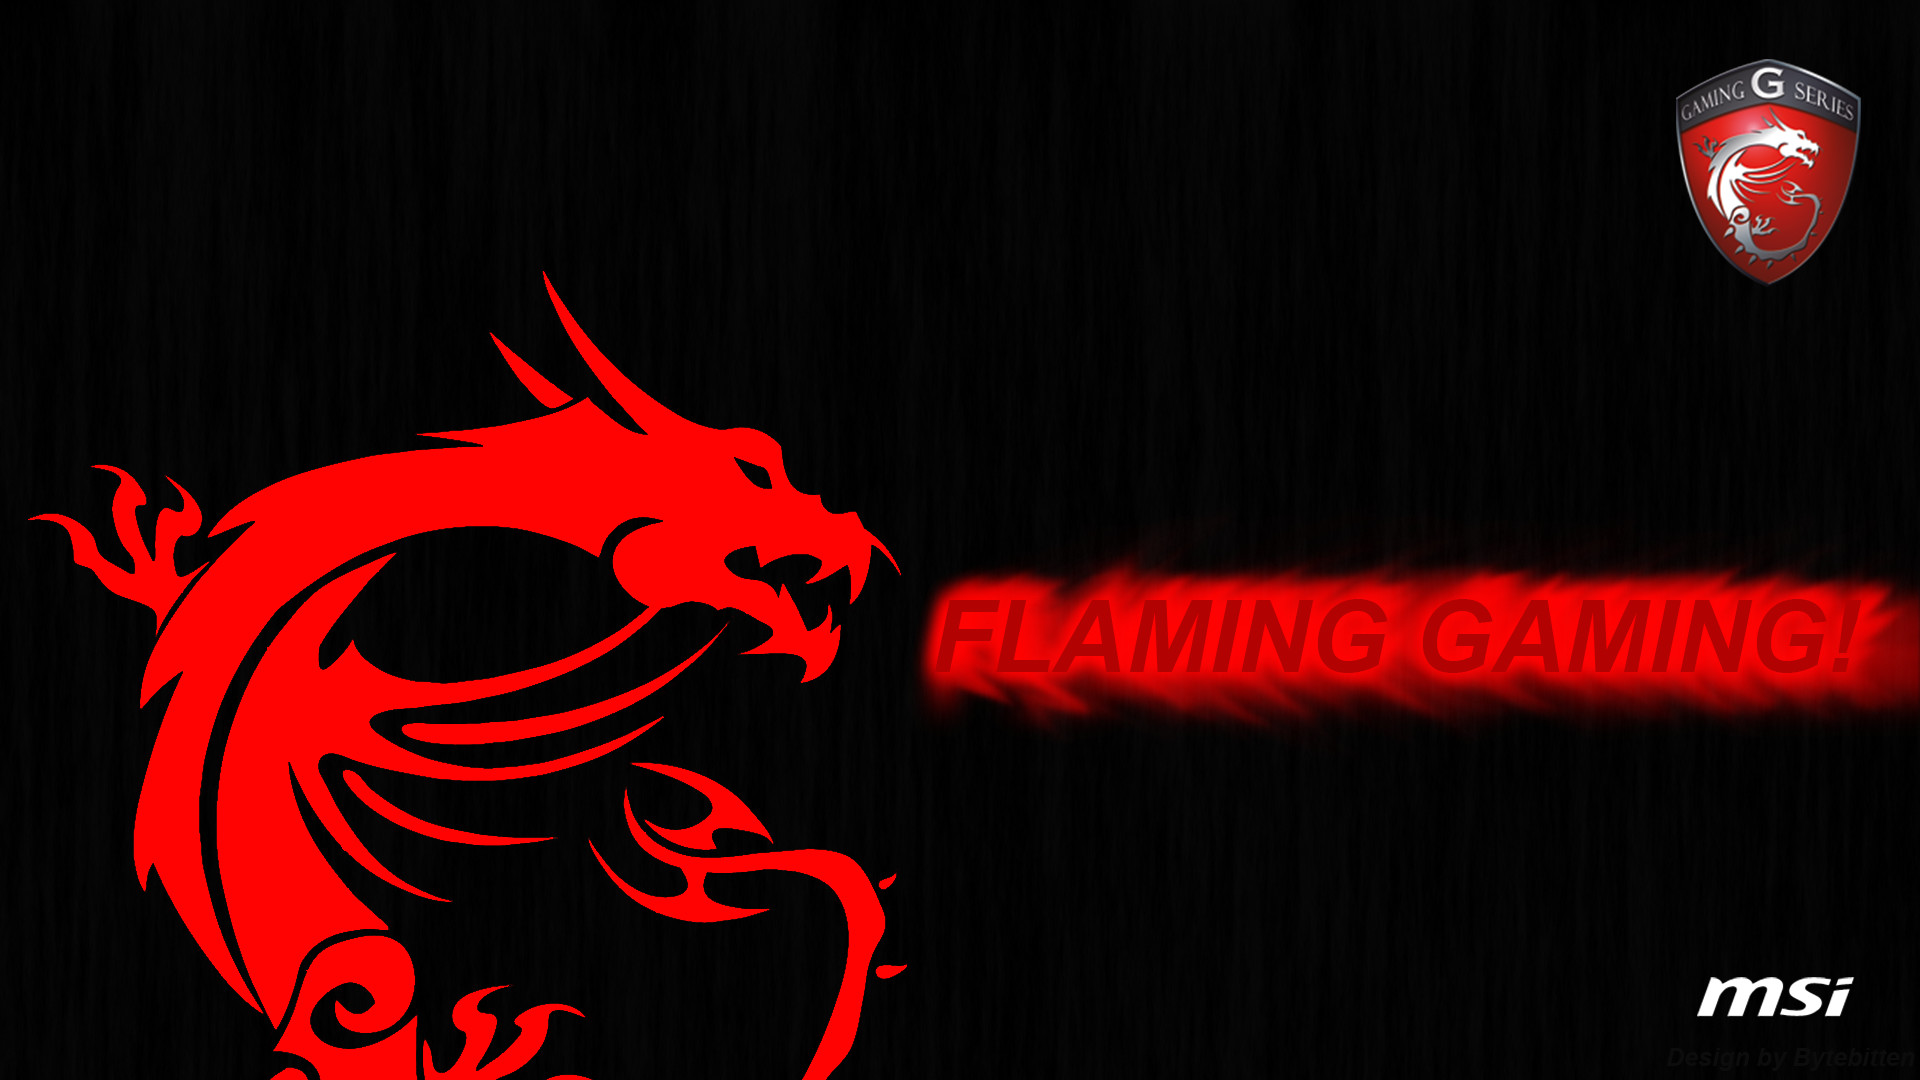 HD Quality Images of MSI Gaming Â» #5724273 1920×1080